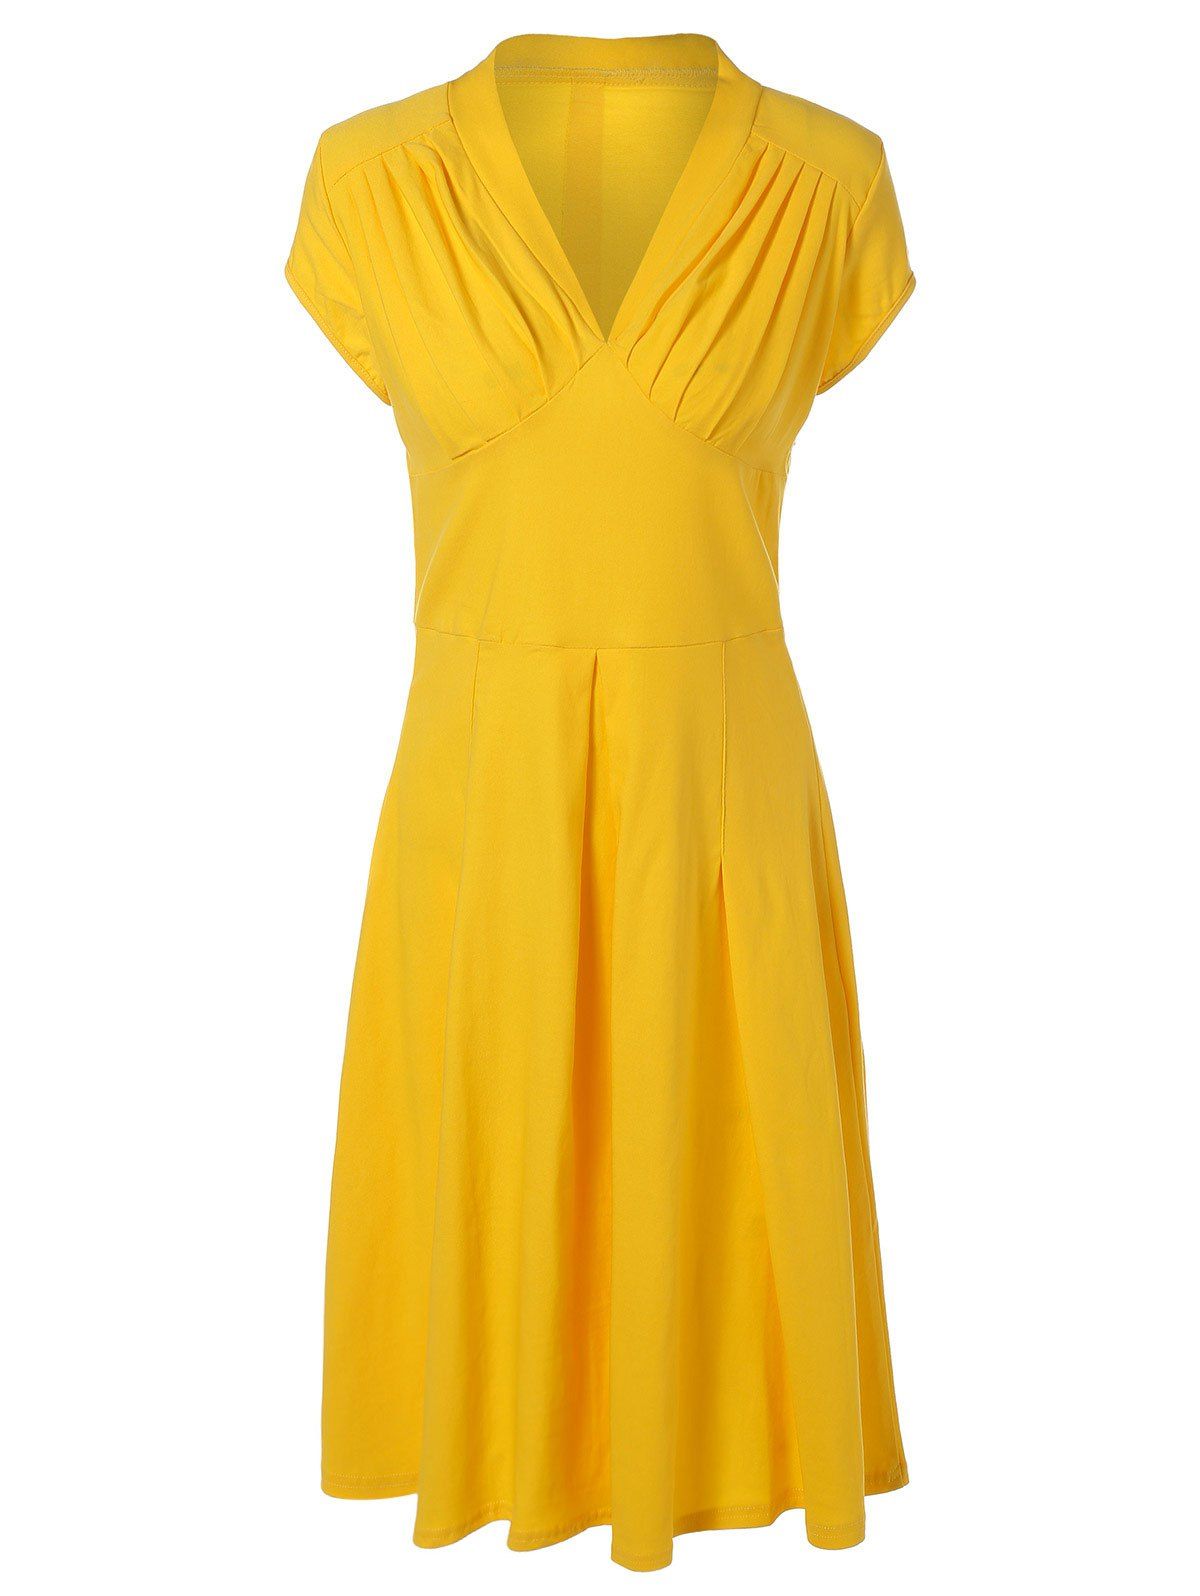 [41% OFF] 2021 Summer Ruched Chest Swing Dress In YELLOW | DressLily